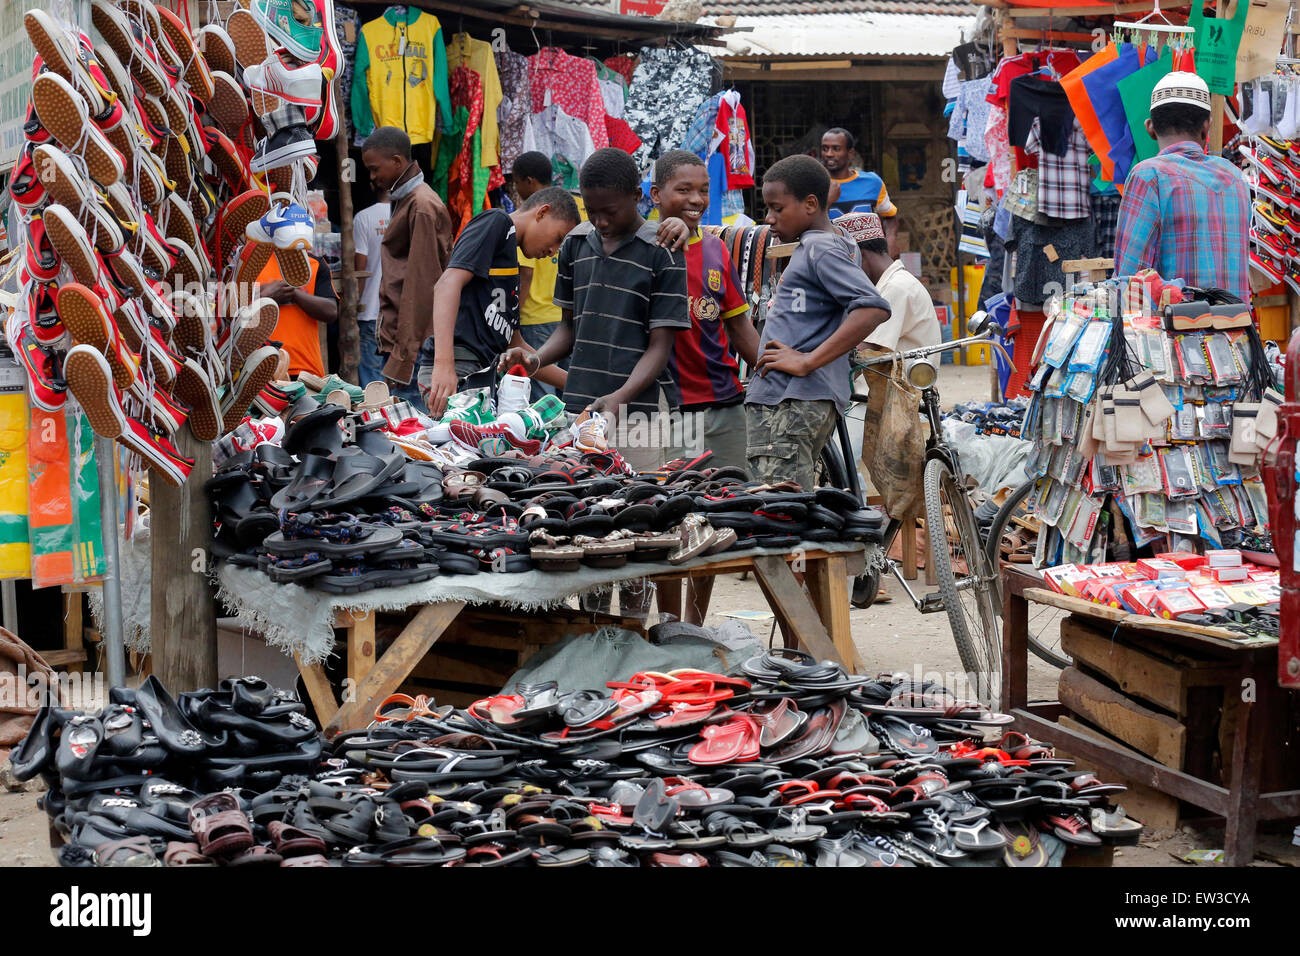 Young boys looking for shoes at an outdoor shoe shop on Zansibar island, Tansania, Africa Stock Photo